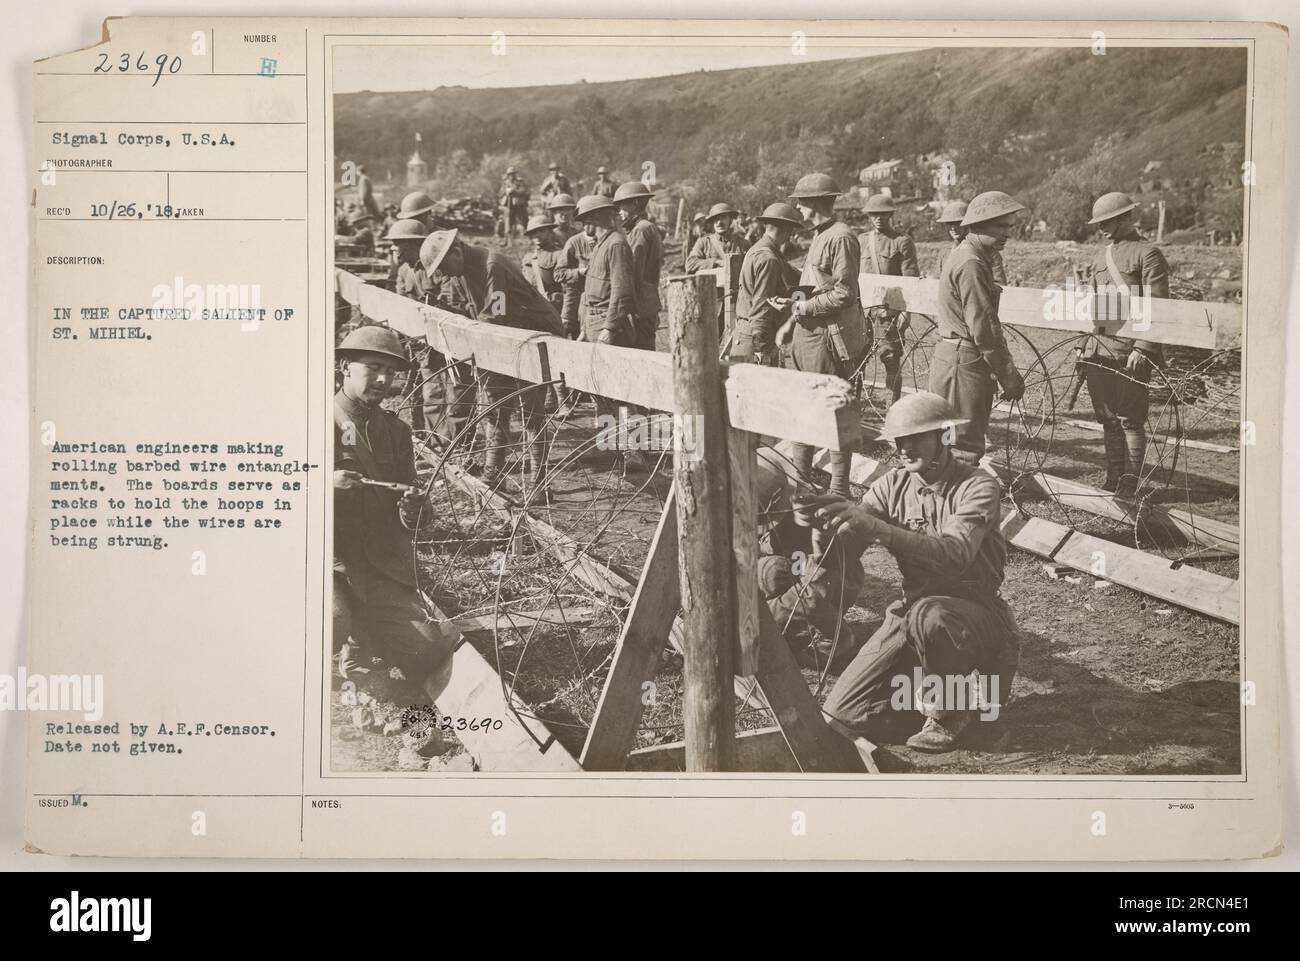 American engineers constructing rolling barbed wire entanglements in the captured salient of St. Mihiel during World War One. The racks made from boards are used to hold the hoops in place while the wires are being strung. The photograph was released by A.E.F. Censor and the date is not provided. Stock Photo